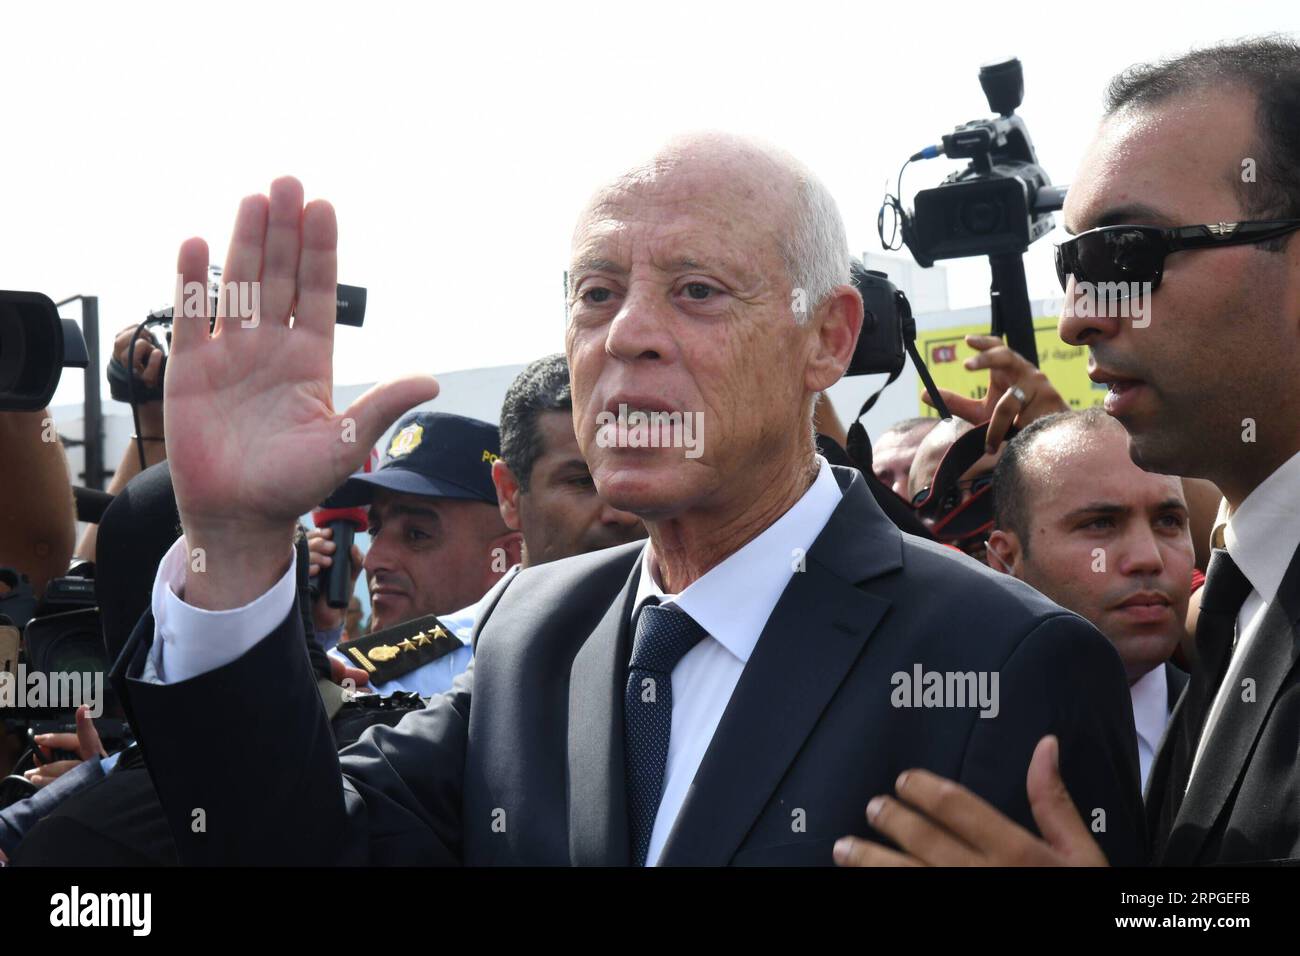 191013 -- TUNIS, Oct. 13, 2019 -- Presidential candidate Kais Saied participates in the second round of presidential election at a polling station in Tunis, Tunisia, Oct. 13, 2019. Polling stations in Tunisia s 27 constituencies opened at 8 a.m. 0700 GMT local time on Sunday to start the second round of presidential election. Kais Saied, an independent candidate and a constitutional professor winning 18.4 percent of the votes in the first round, faces Nabil Karoui, leader of the Heart of Tunisia party who got 15.58 percent of the votes in the first round of the election held on Sept. 15. Photo Stock Photo